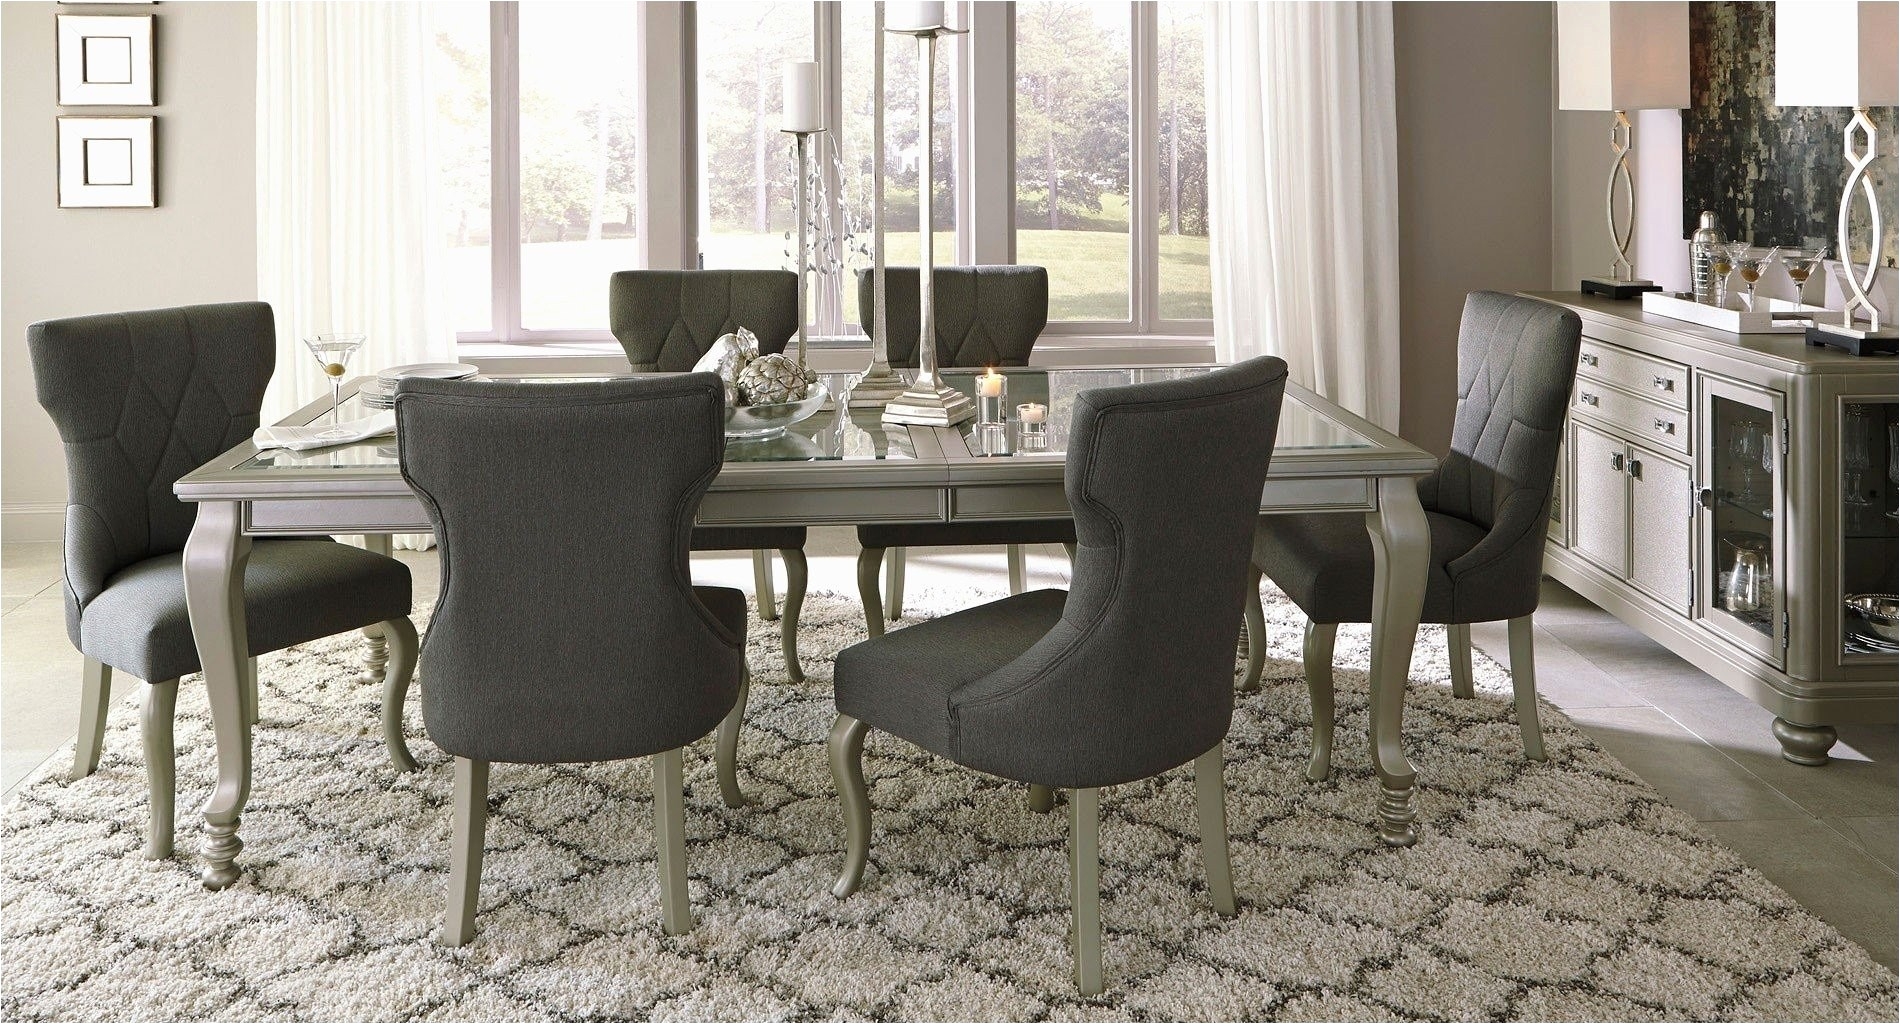 furniture chairs dining room chair inspirational shaker chairs 0d archives modern